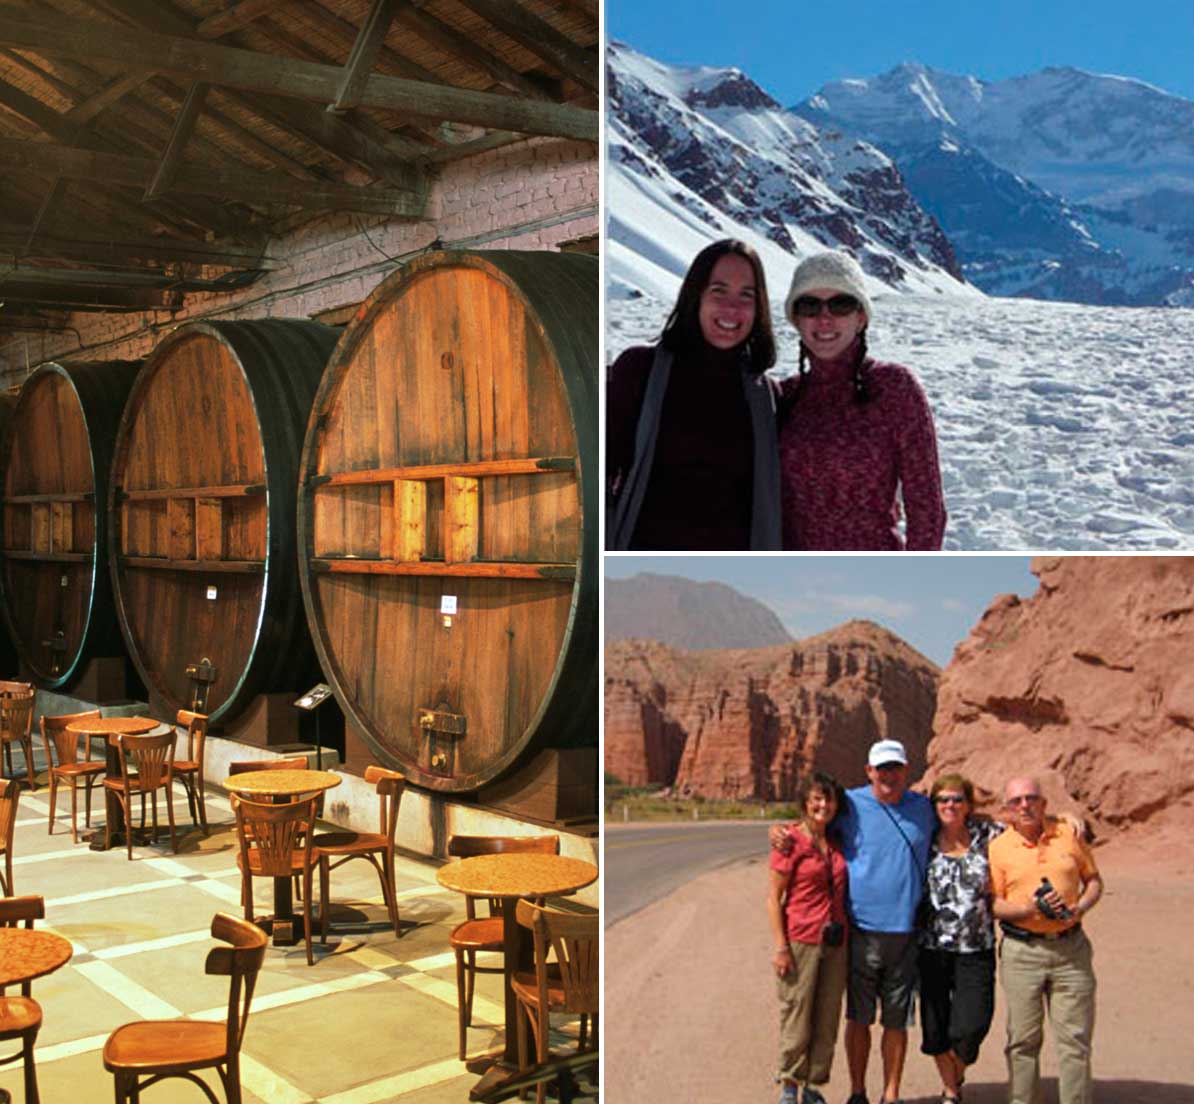 A collage showing a winery and two groups of tourists posing in front of different landscapes.